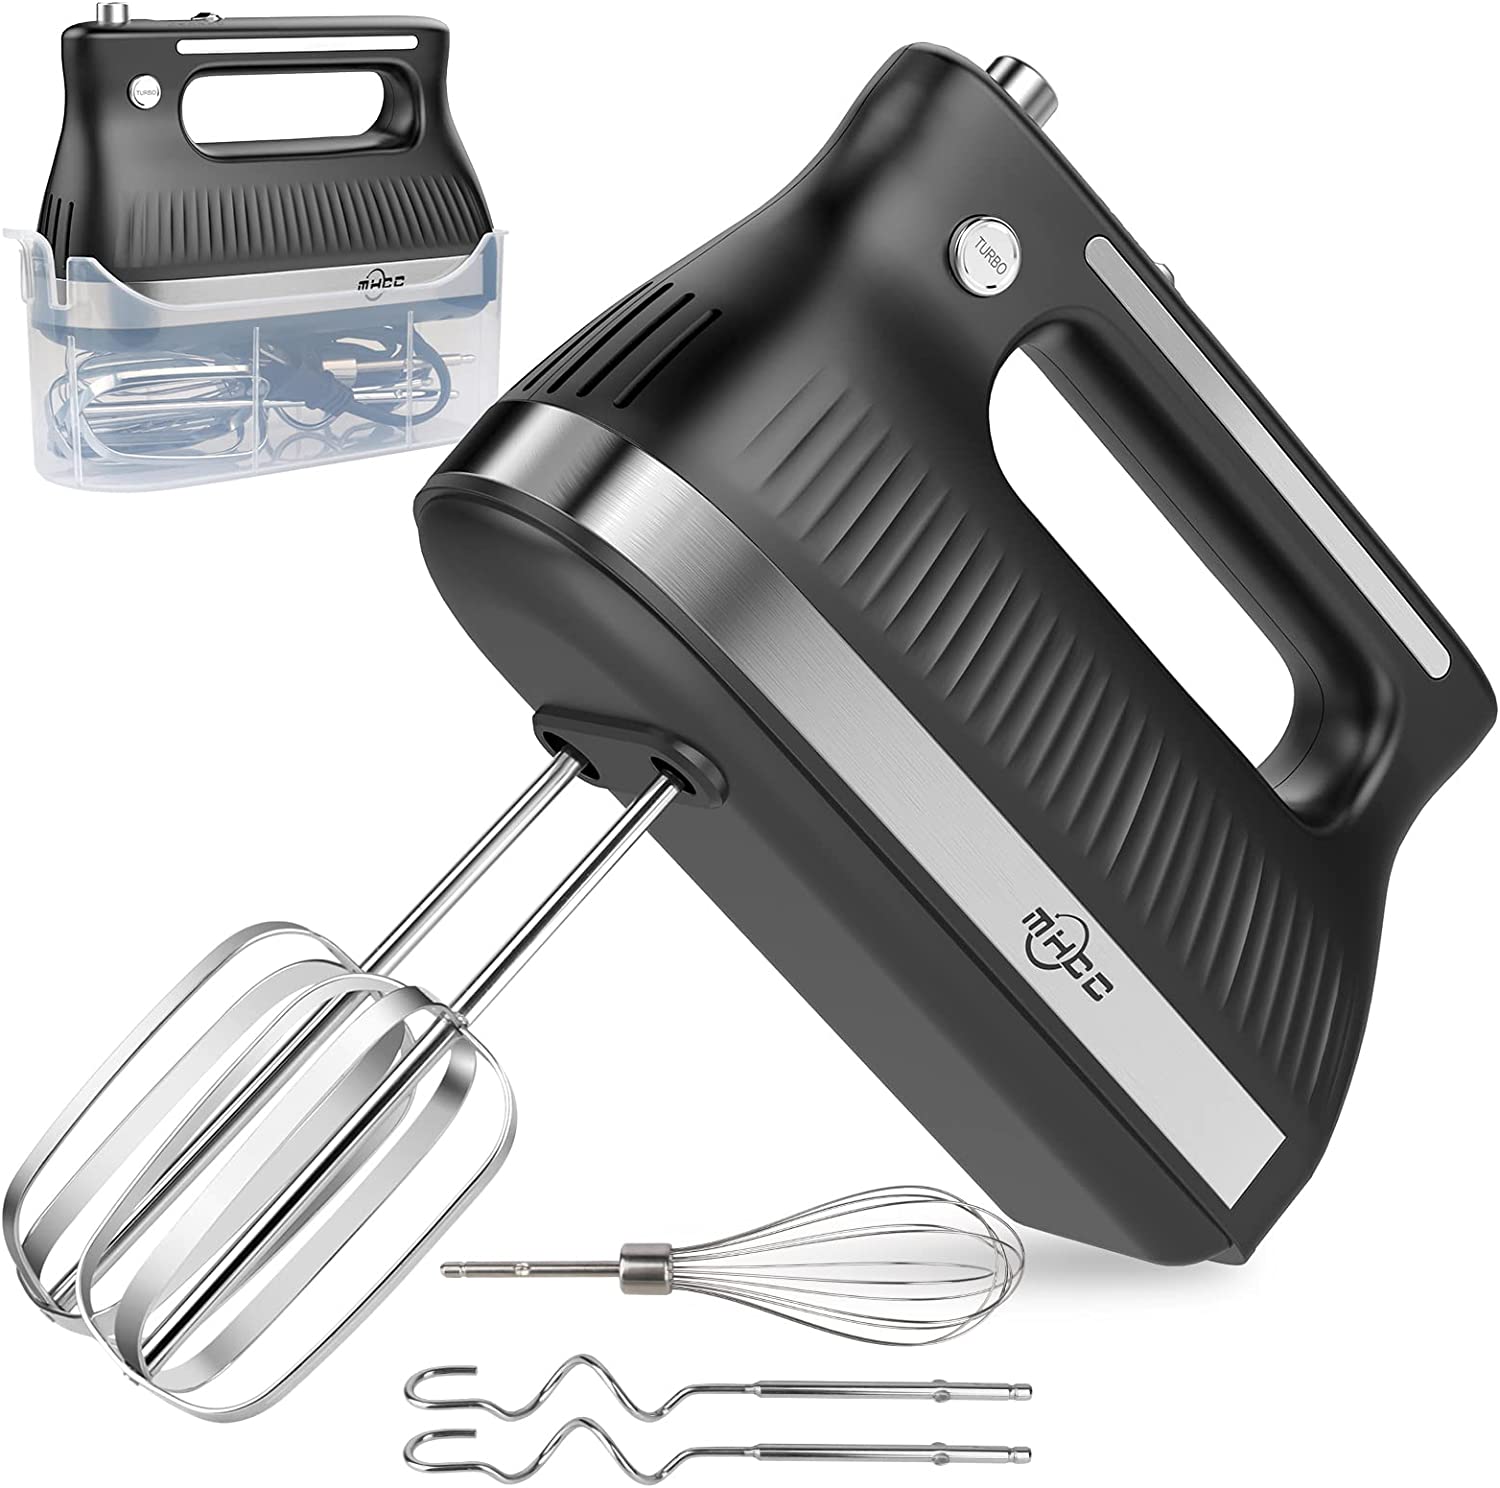 The Best Hand Mixer  Reviews, Ratings, Comparisons